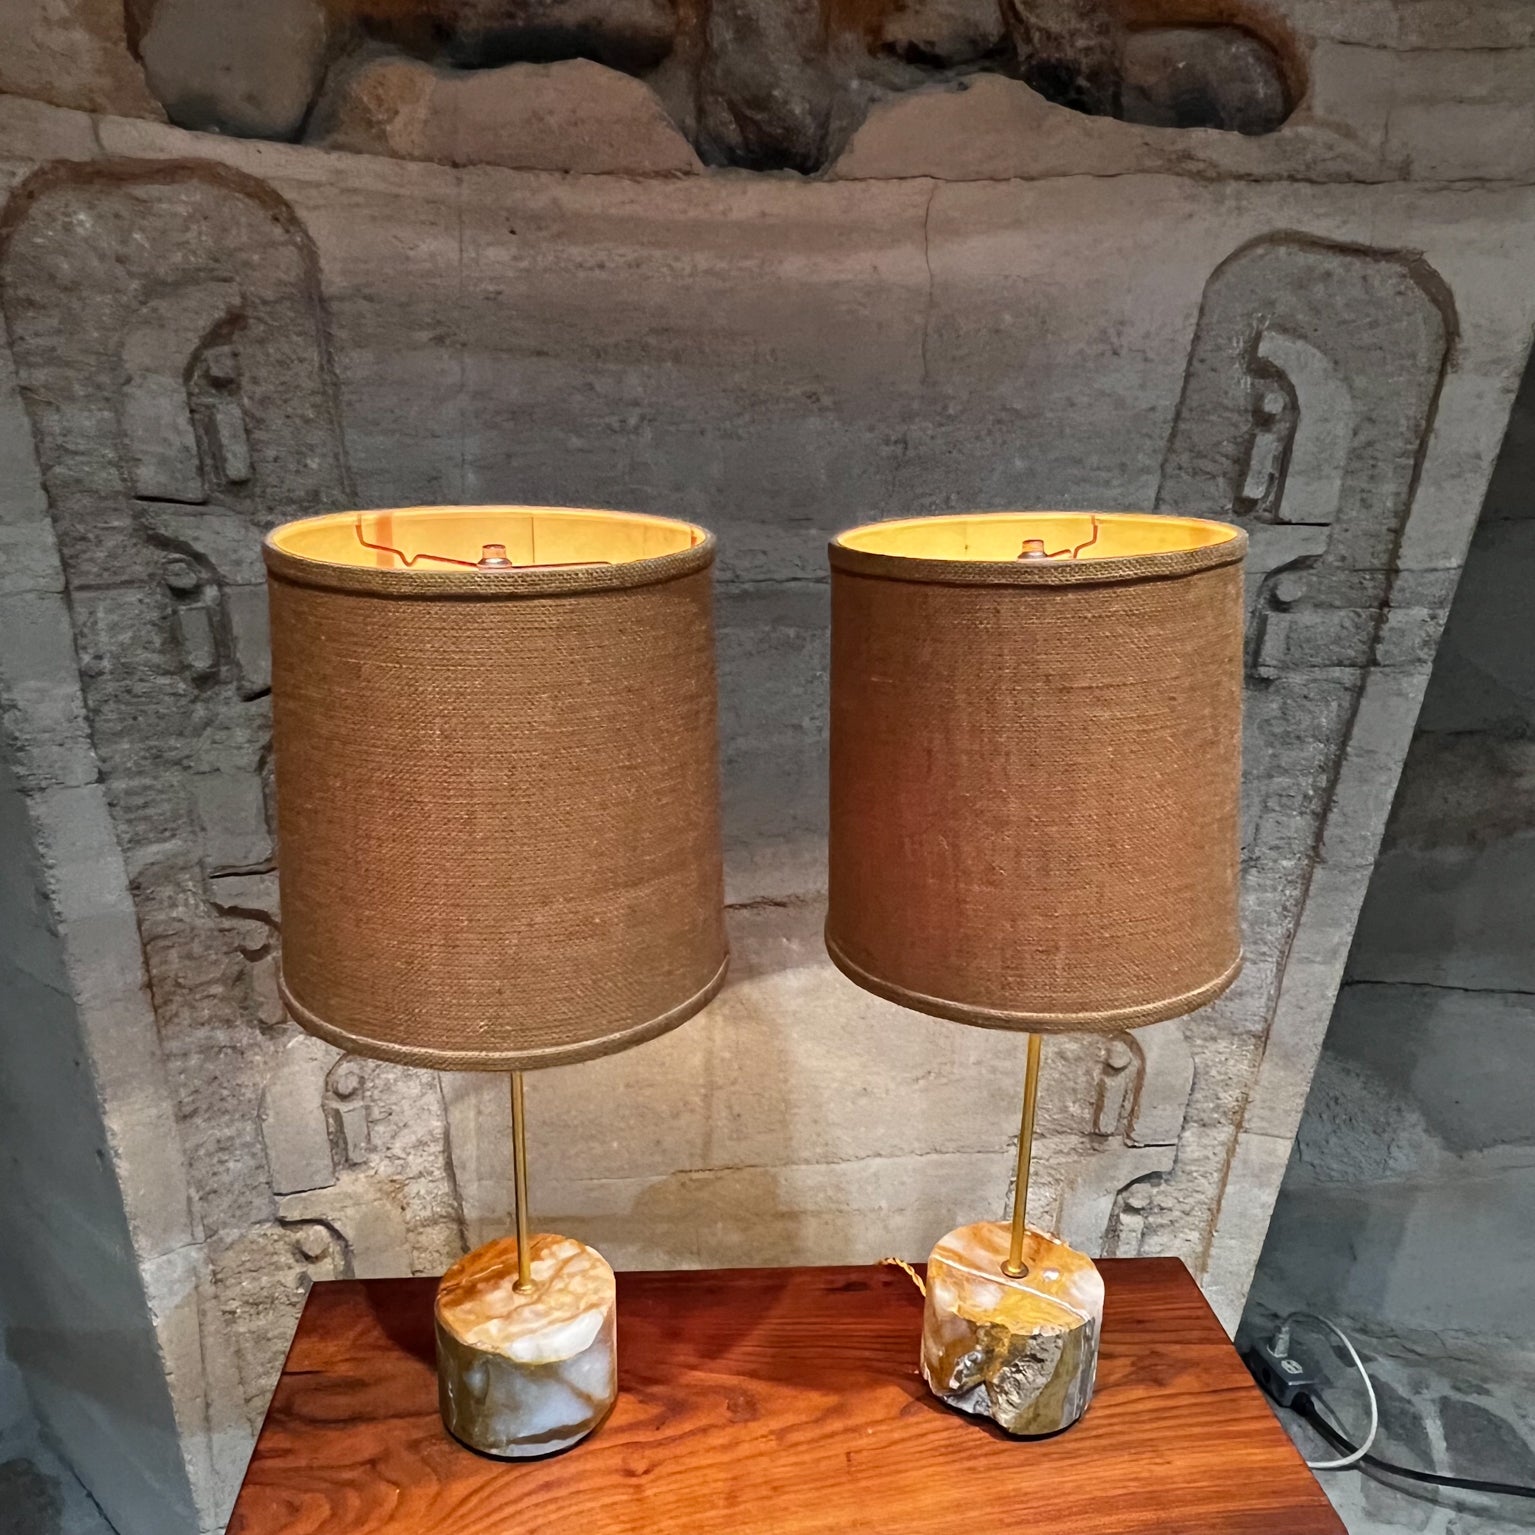 New Limited Edition Spectacular Set of Onyx Acid Table Lamps
19 tall x 5.5 in diameter
Original vintage condition.
Does not include lamp shades.
See all images provided please.
Features new wiring, new socket and plug.
Tested and